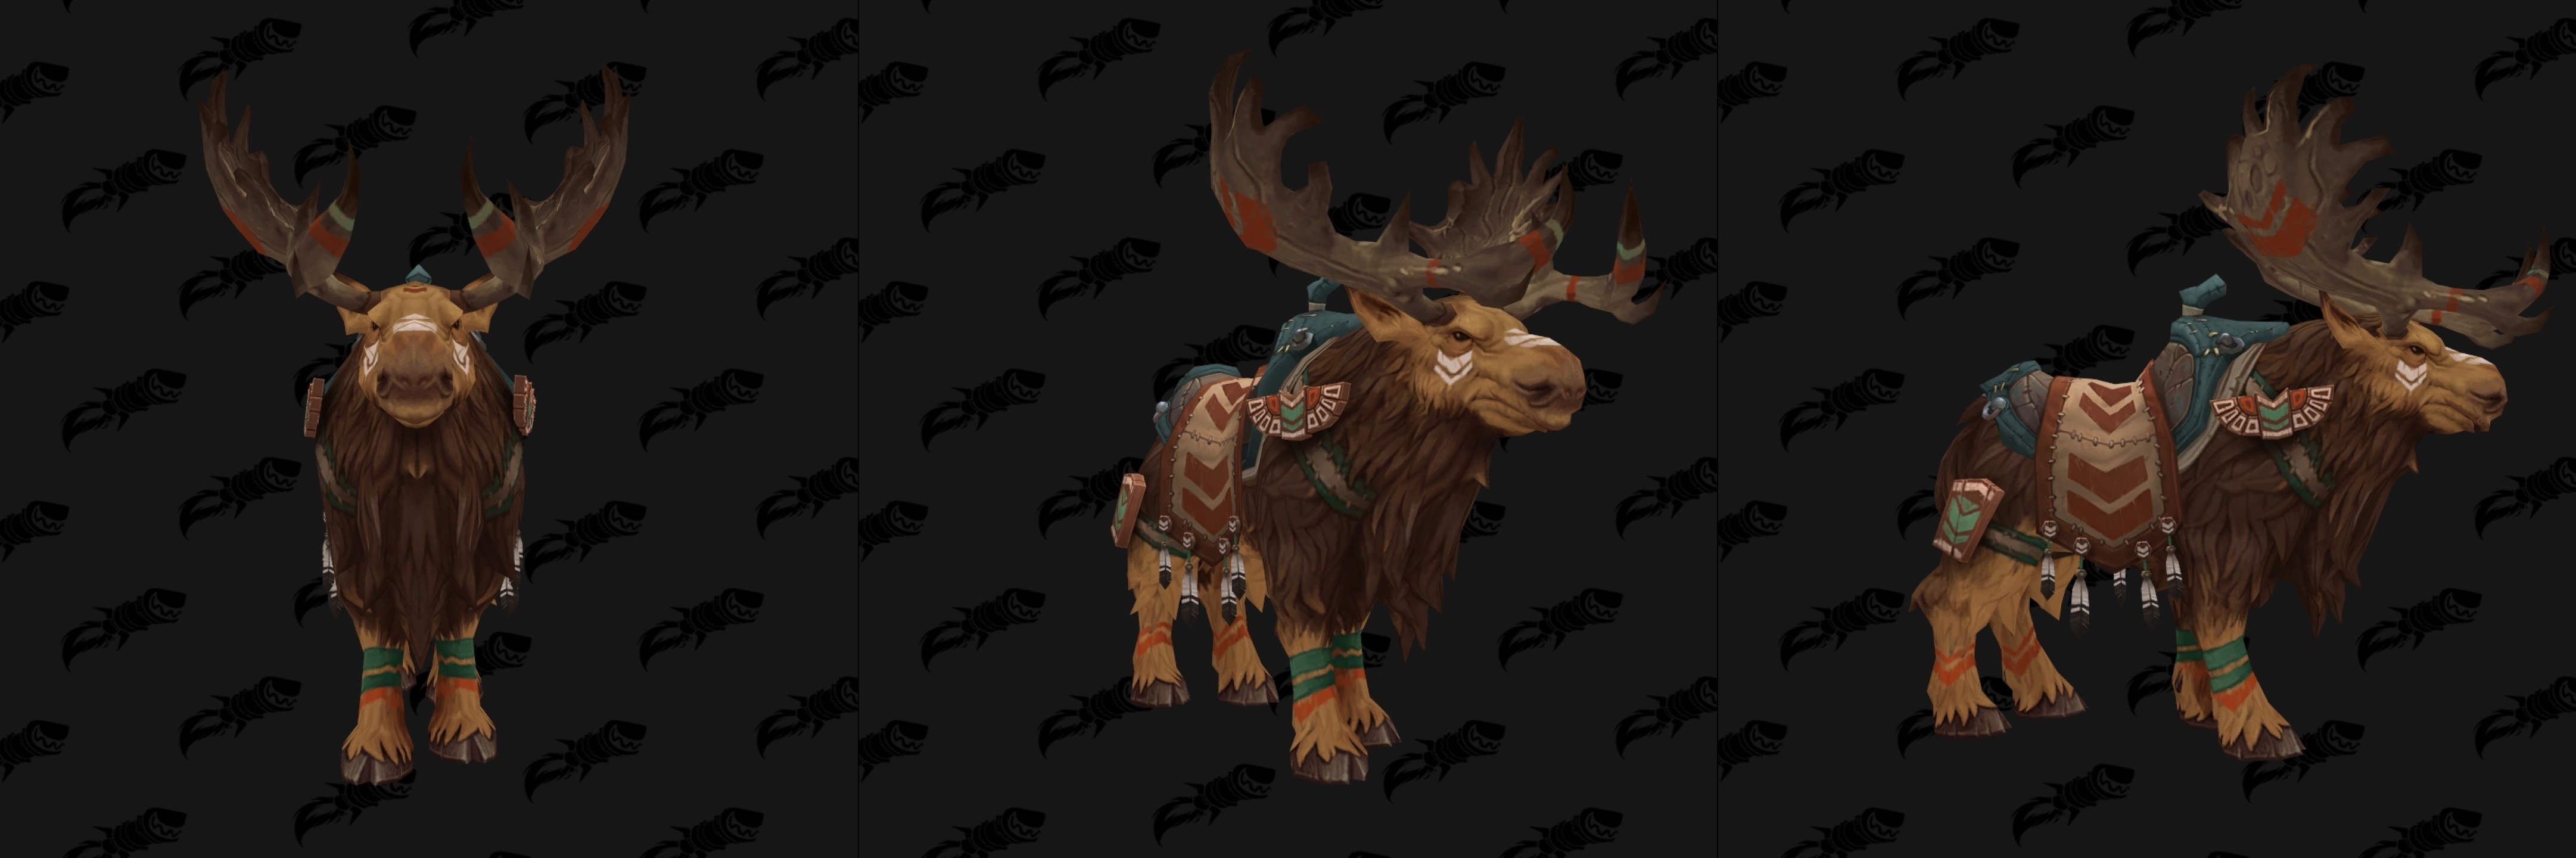 Highmountain Tauren Customization And Culture Themed Spell And Ability